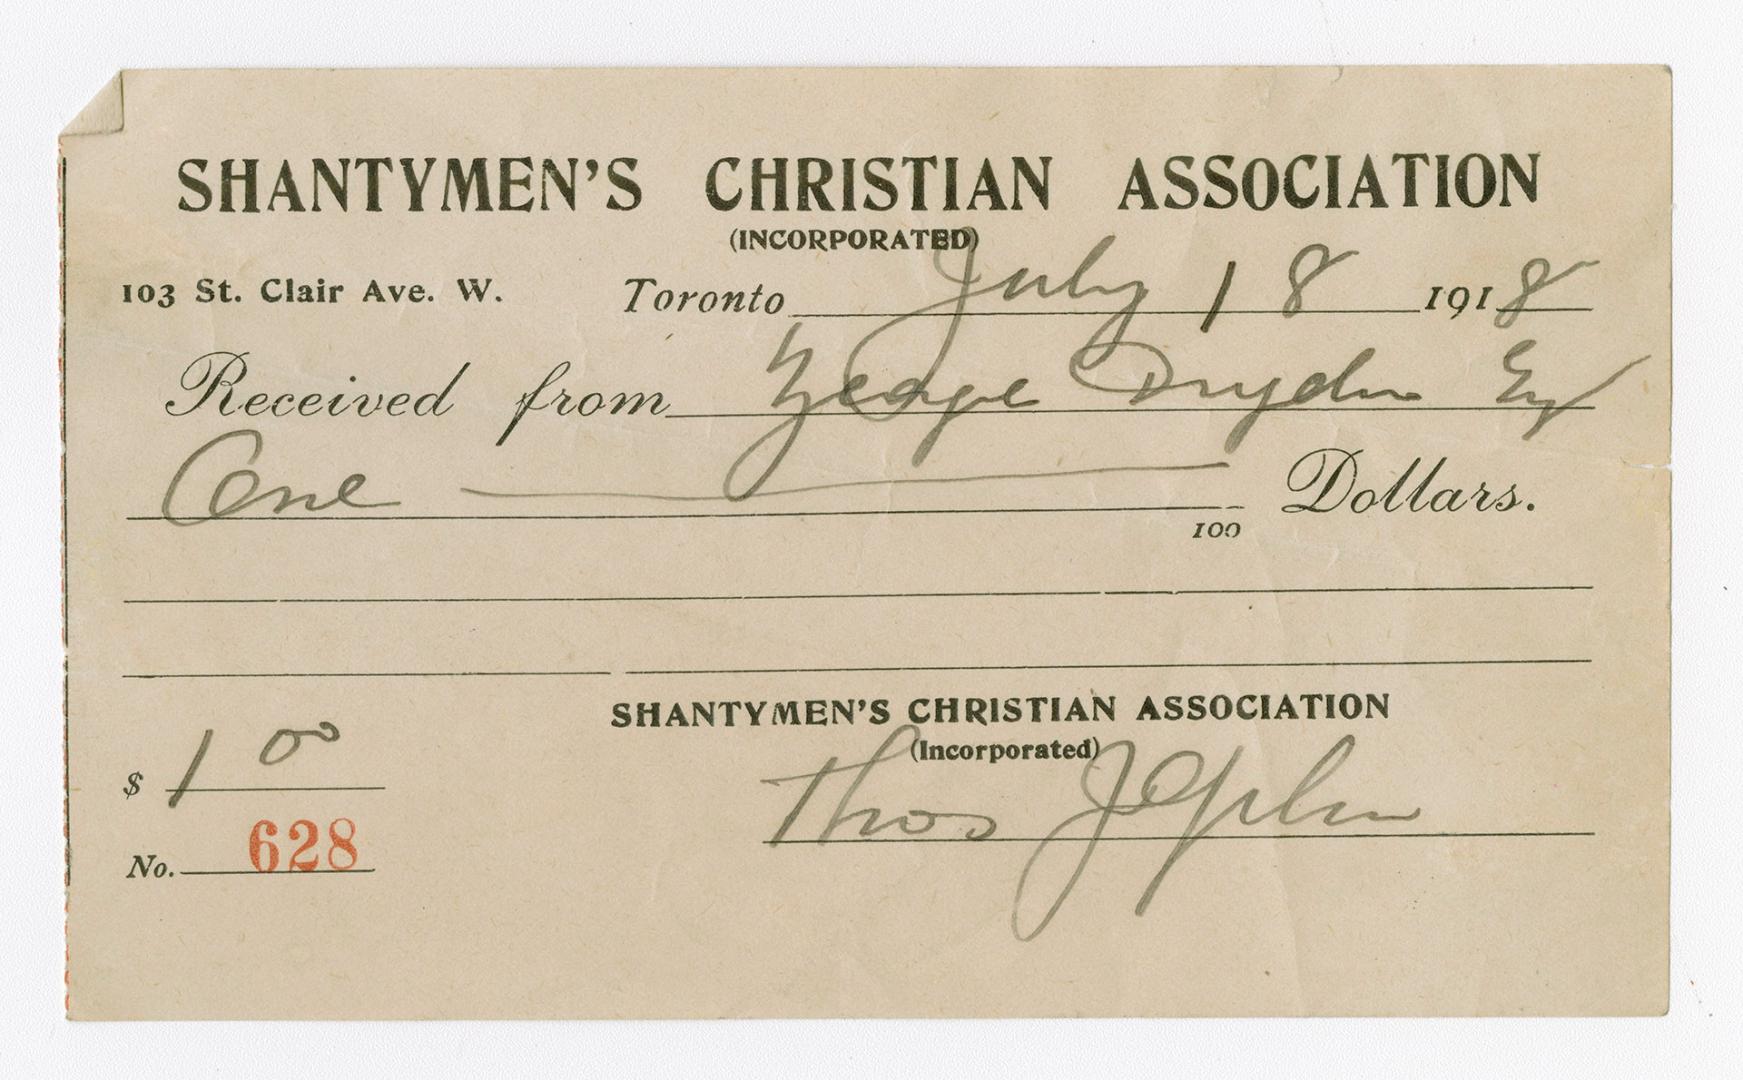 Image shows a receipt from Shantymen's Christian Association (Incorporated). 